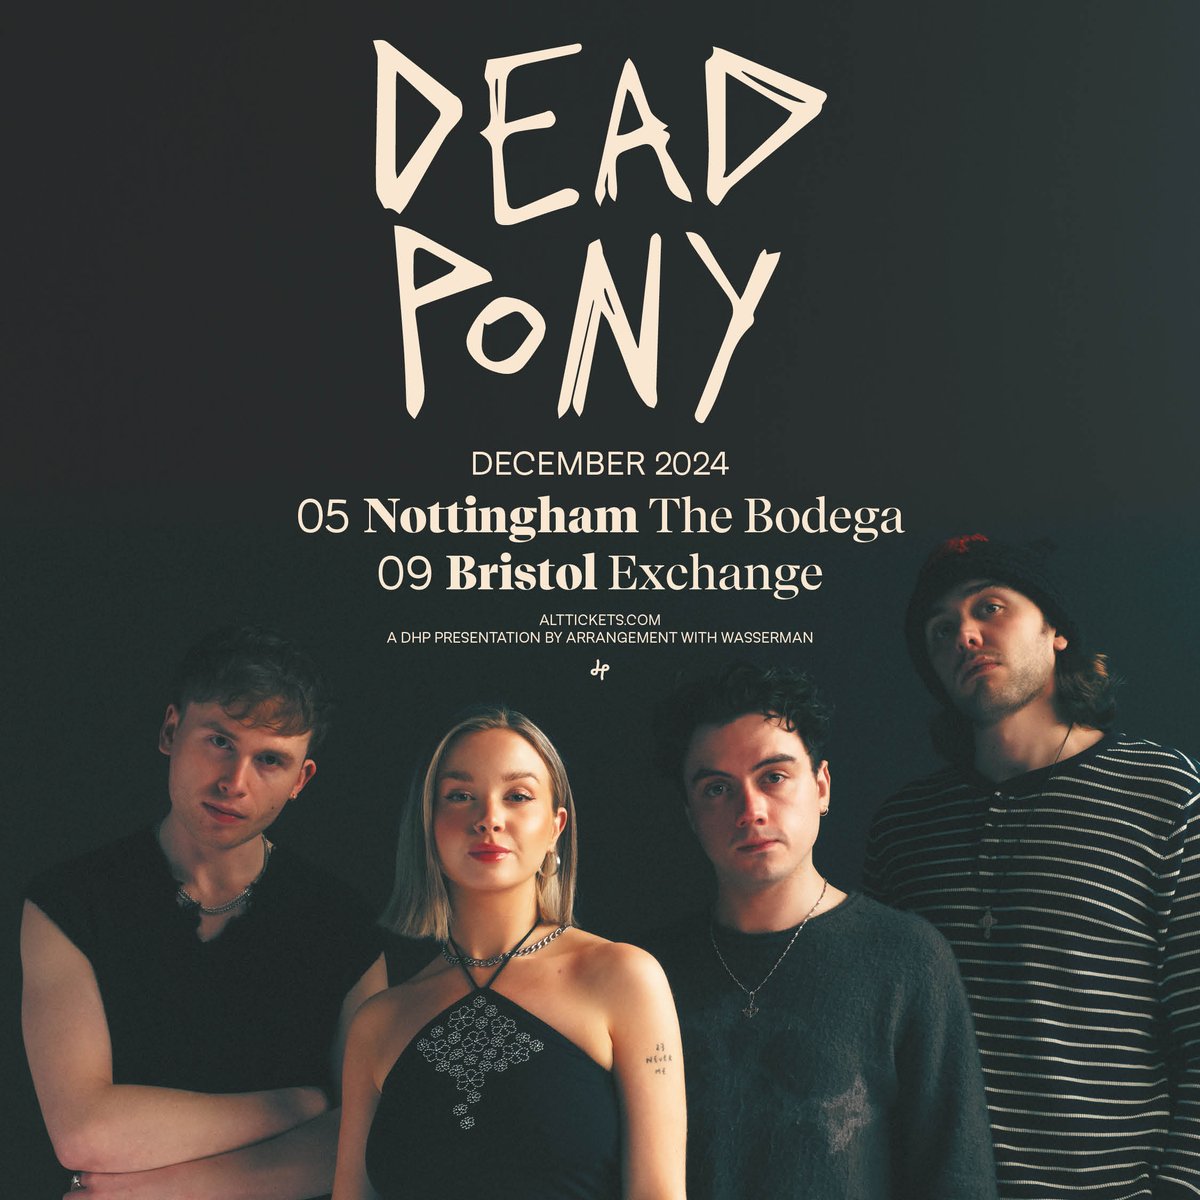 NEW/ after releasing their incredible debut album earlier this month, rising Scottish stars @DeadPonyBand have announced shows at @bodeganotts and @exchangebristol on their winter tour this year! Tickets go on sale this Friday at 10am, set a reminder: tinyurl.com/hp4jjv4u